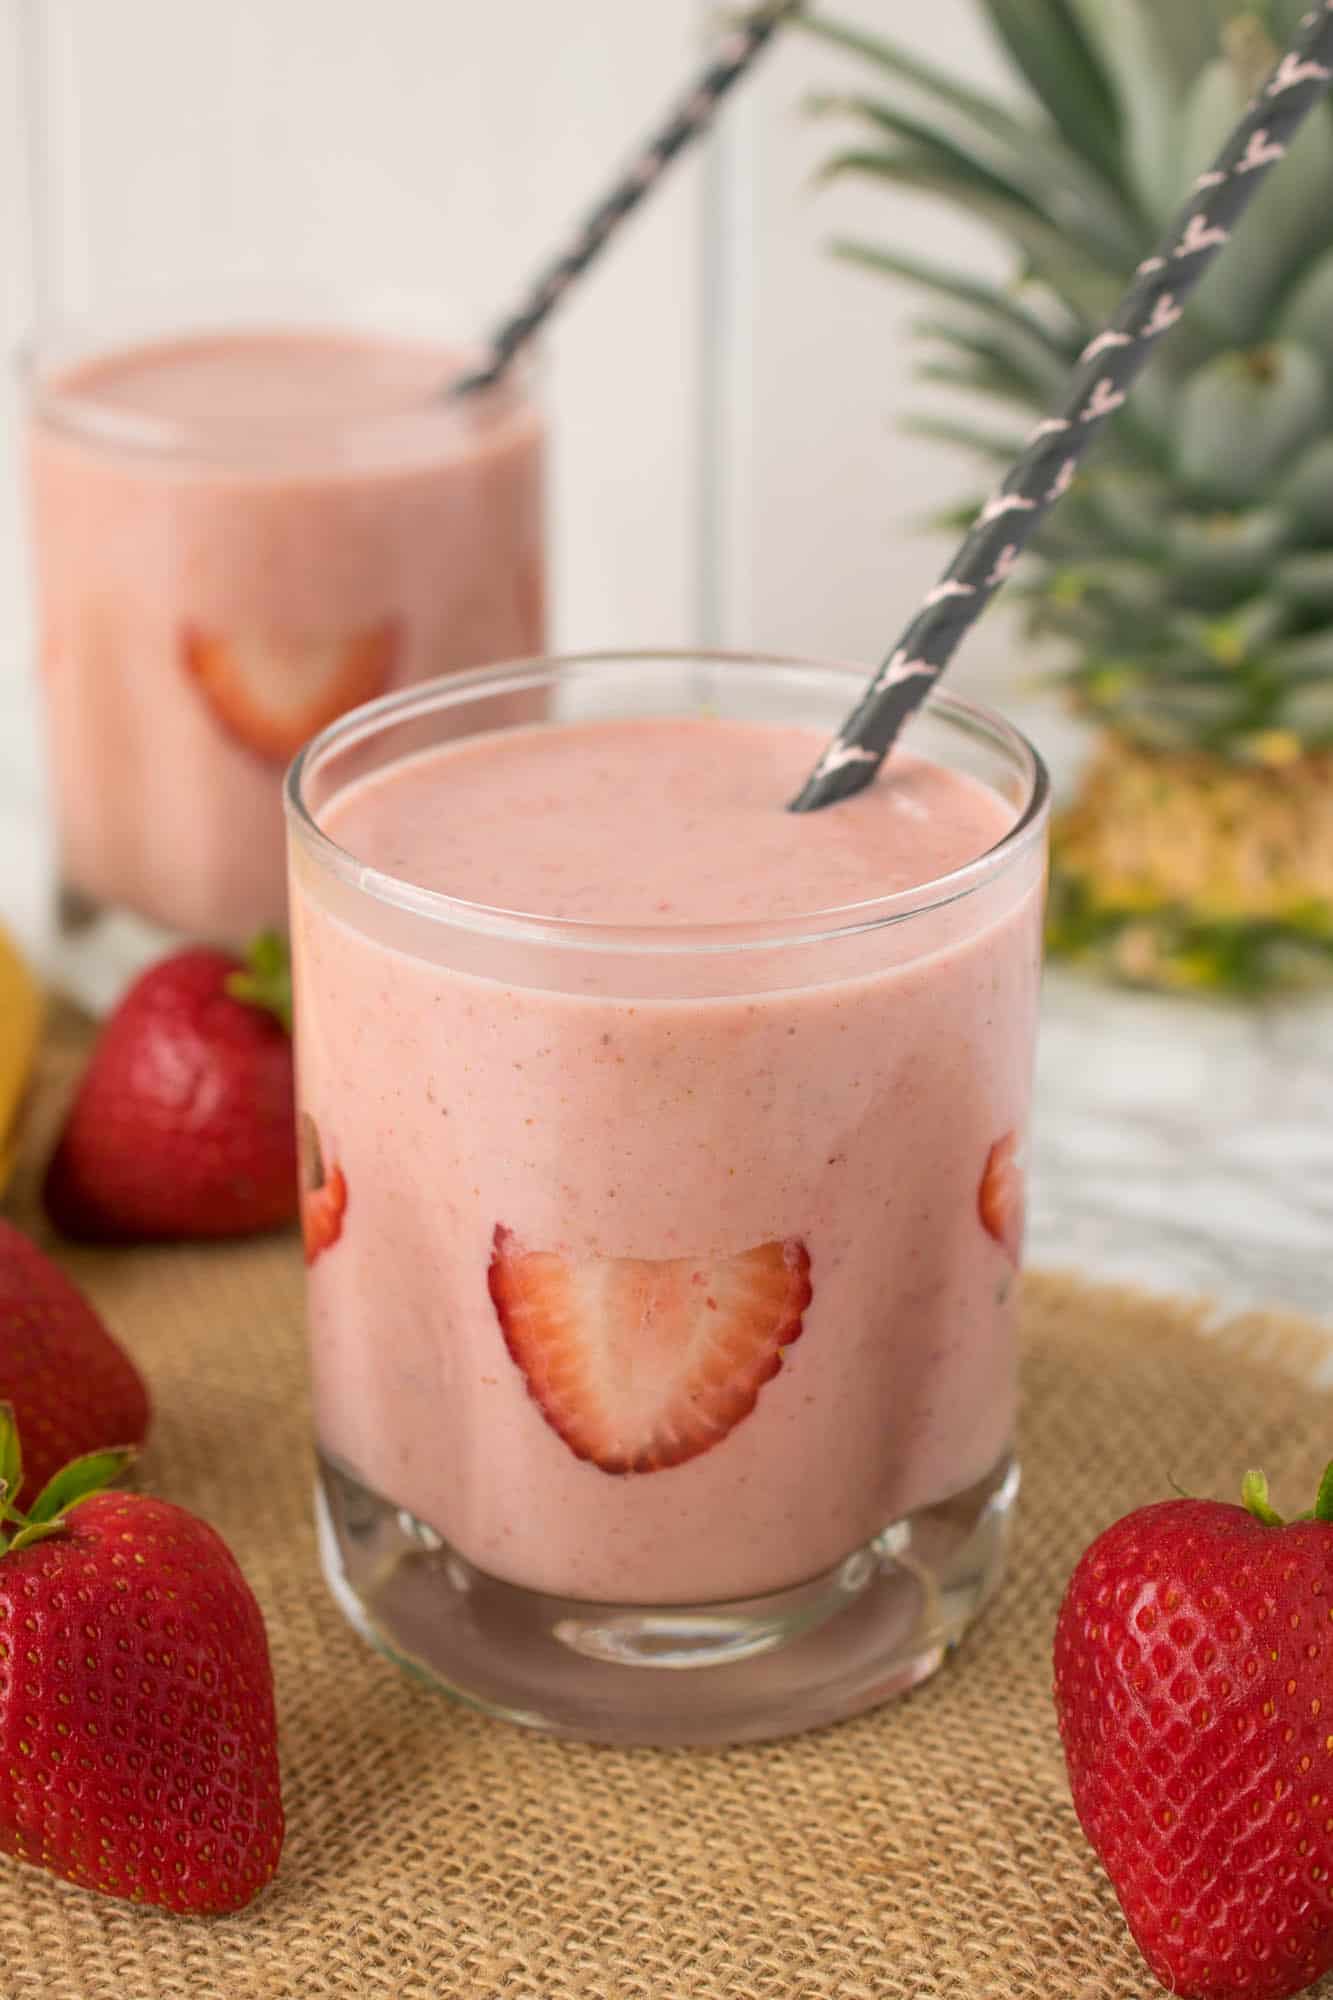 10 Best Protein Smoothies To Lose Weight